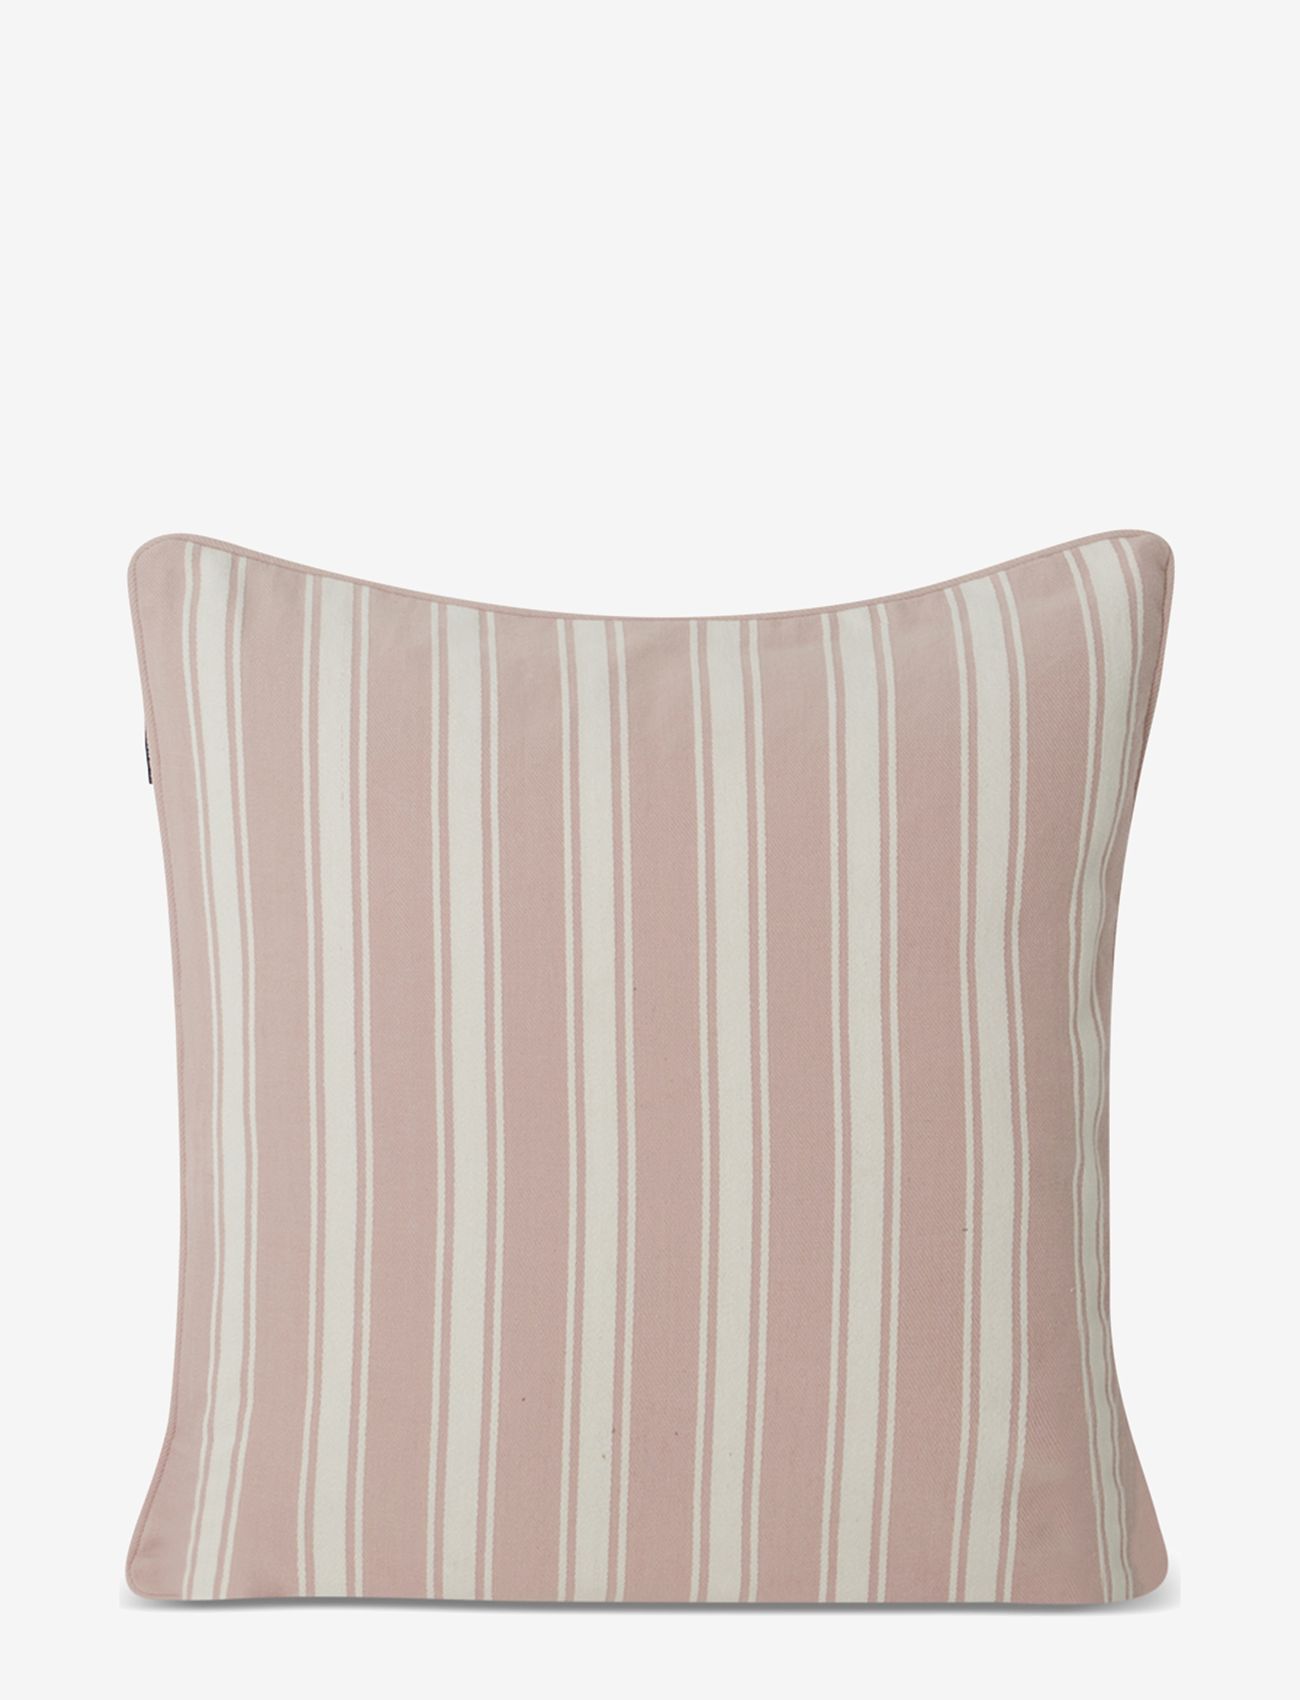 Lexington Home - All Over Striped Organic Cotton Twill Pillow Cover - cushion covers - gray/green/white 5 - 1